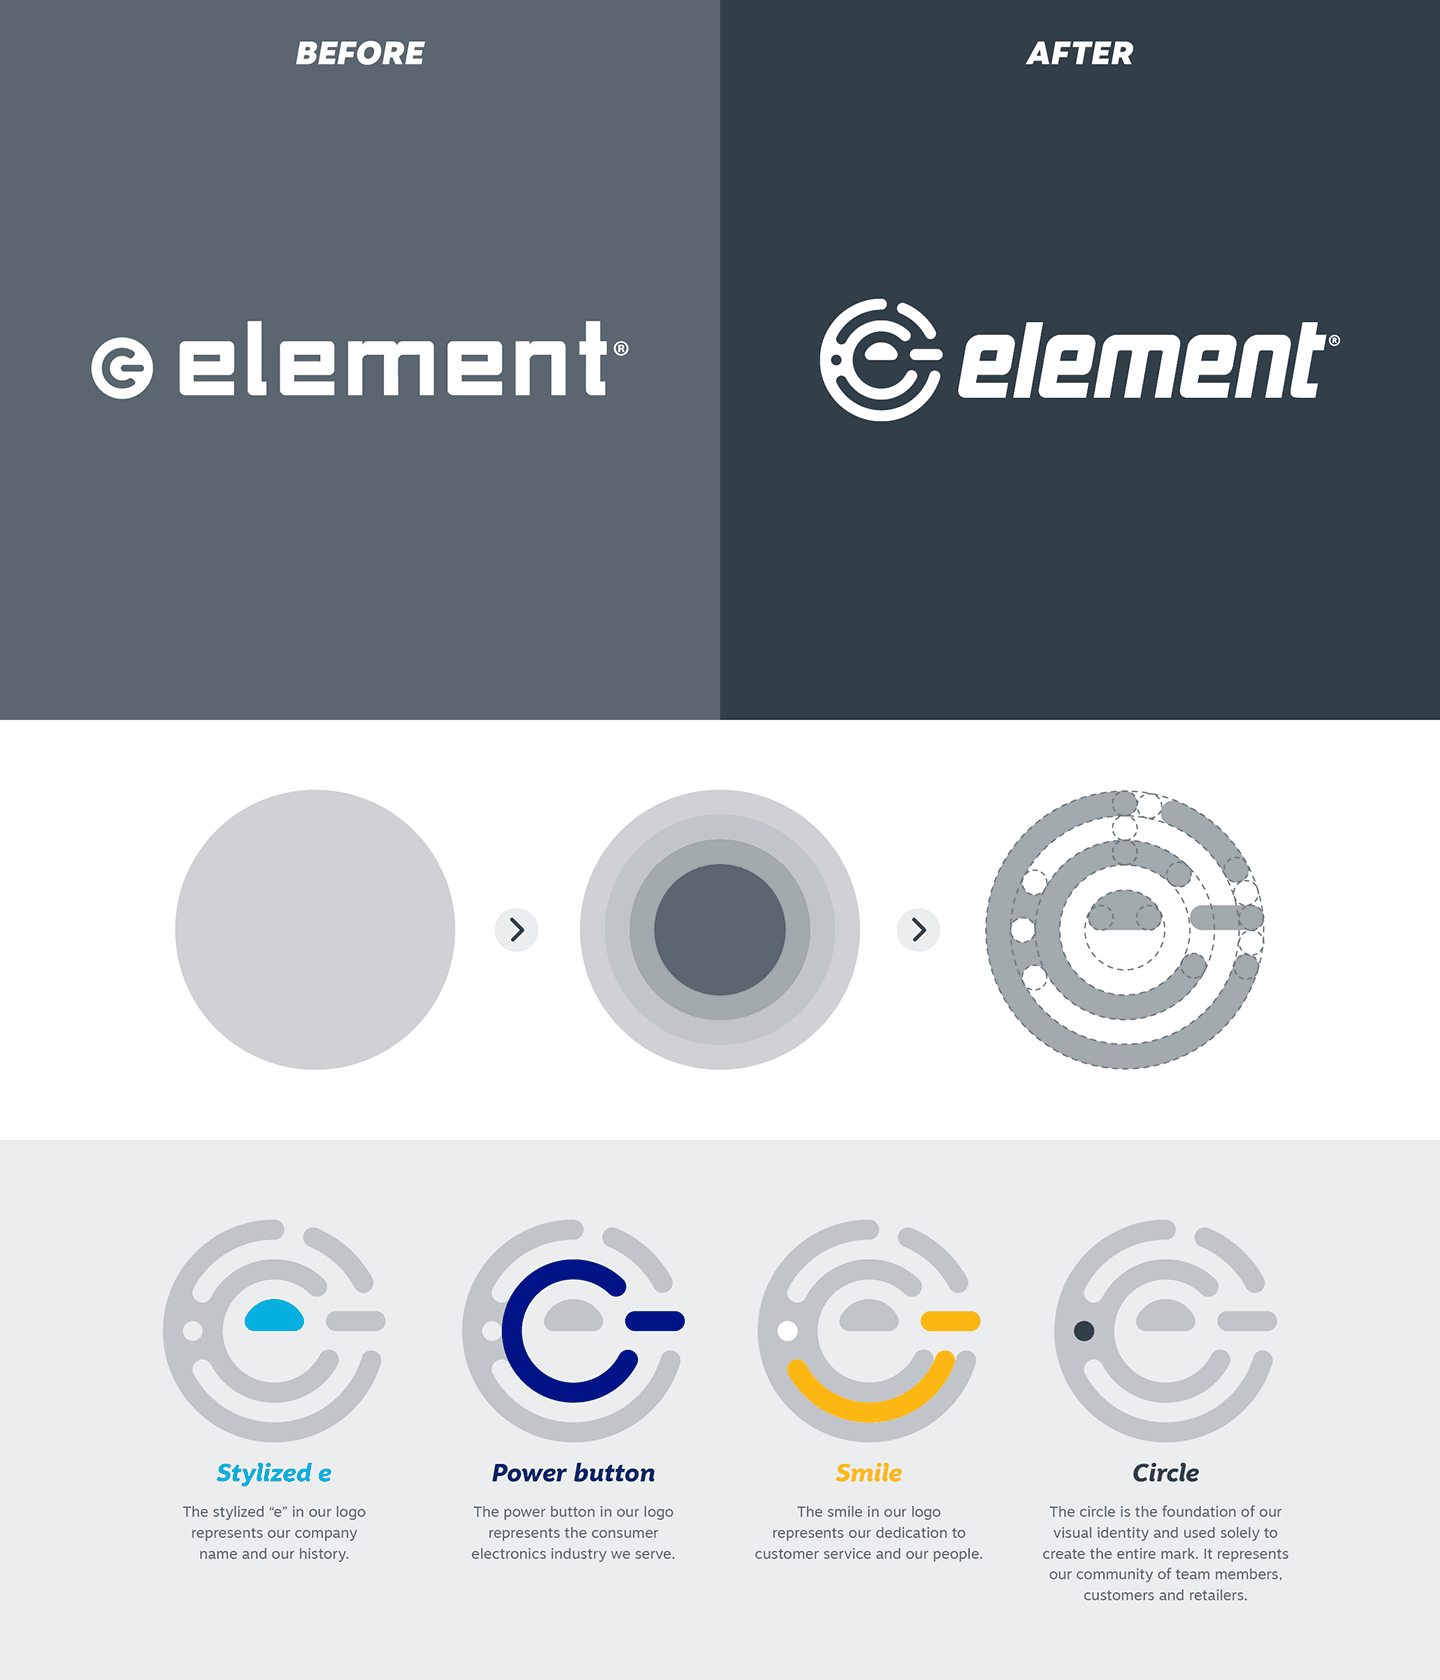 Element electronics logo before and after